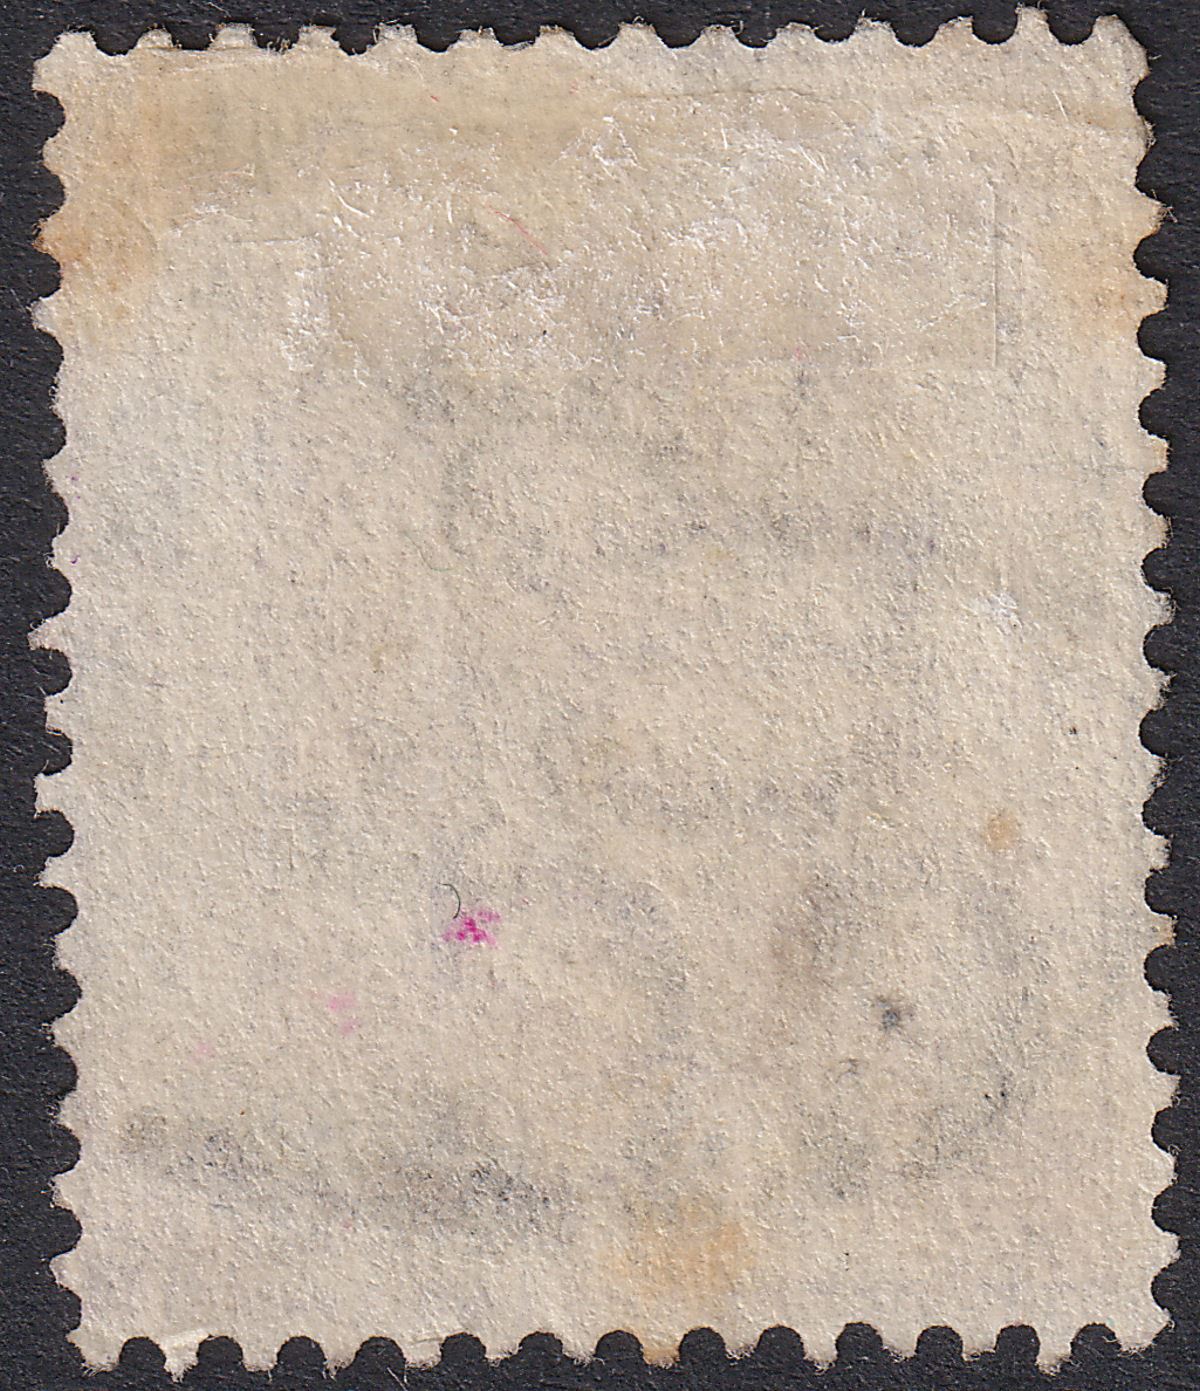 Hong Kong 1876 QV 28c Surch on 30c Used w C1 Canton Postmark SG Z149 cat £140